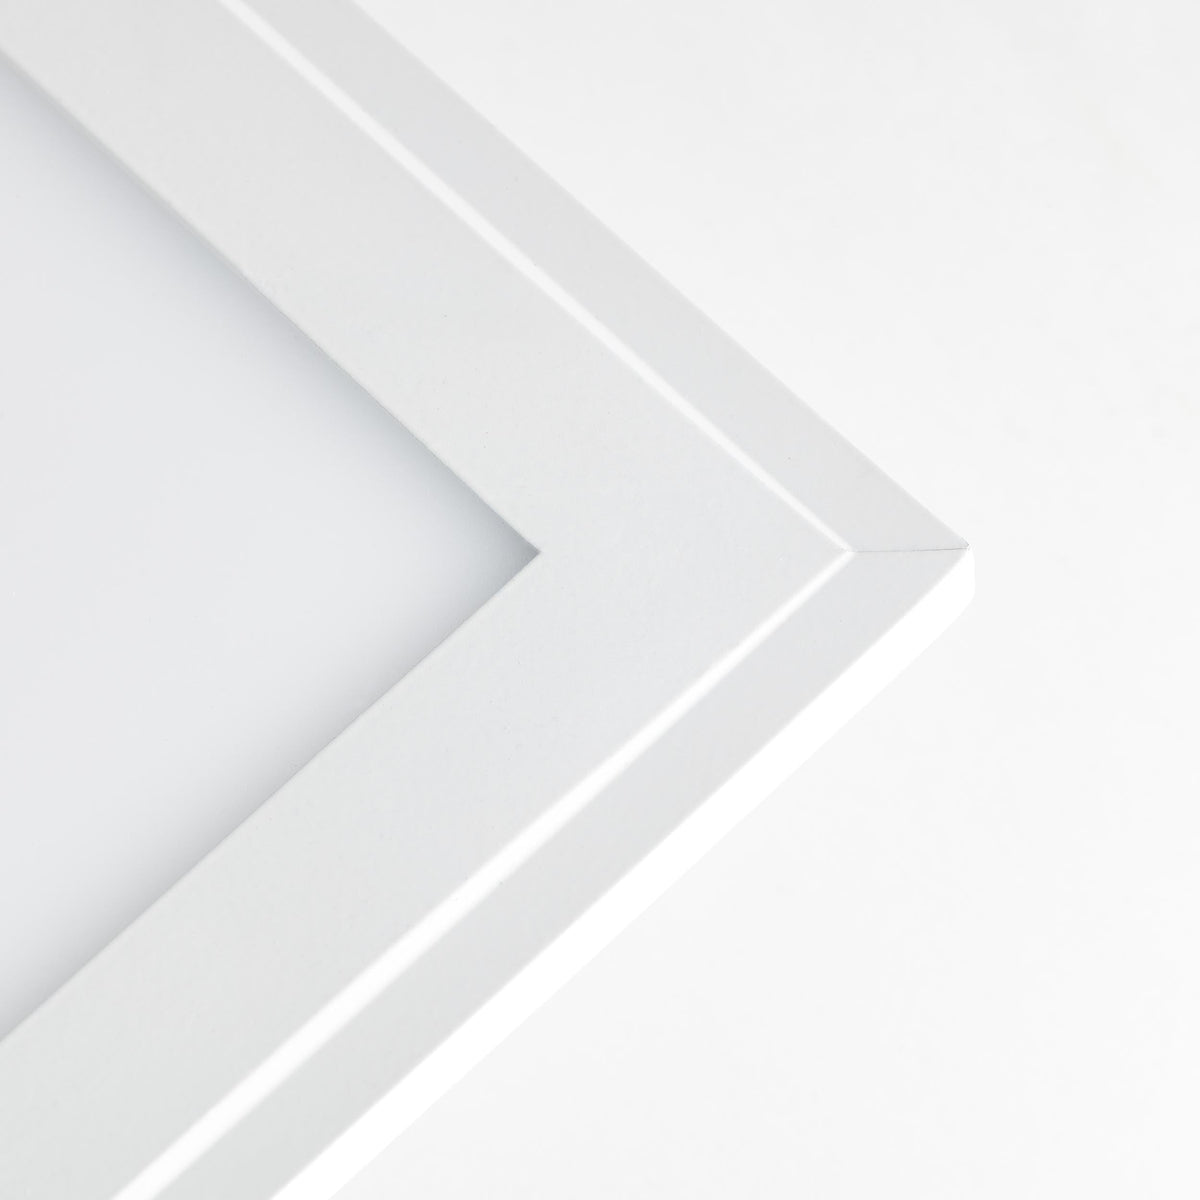 Brilliant 1 Light 40W Abie LED Square Ceiling Panel - White | G90319/05 from DID Electrical - guaranteed Irish, guaranteed quality service. (6977602846908)